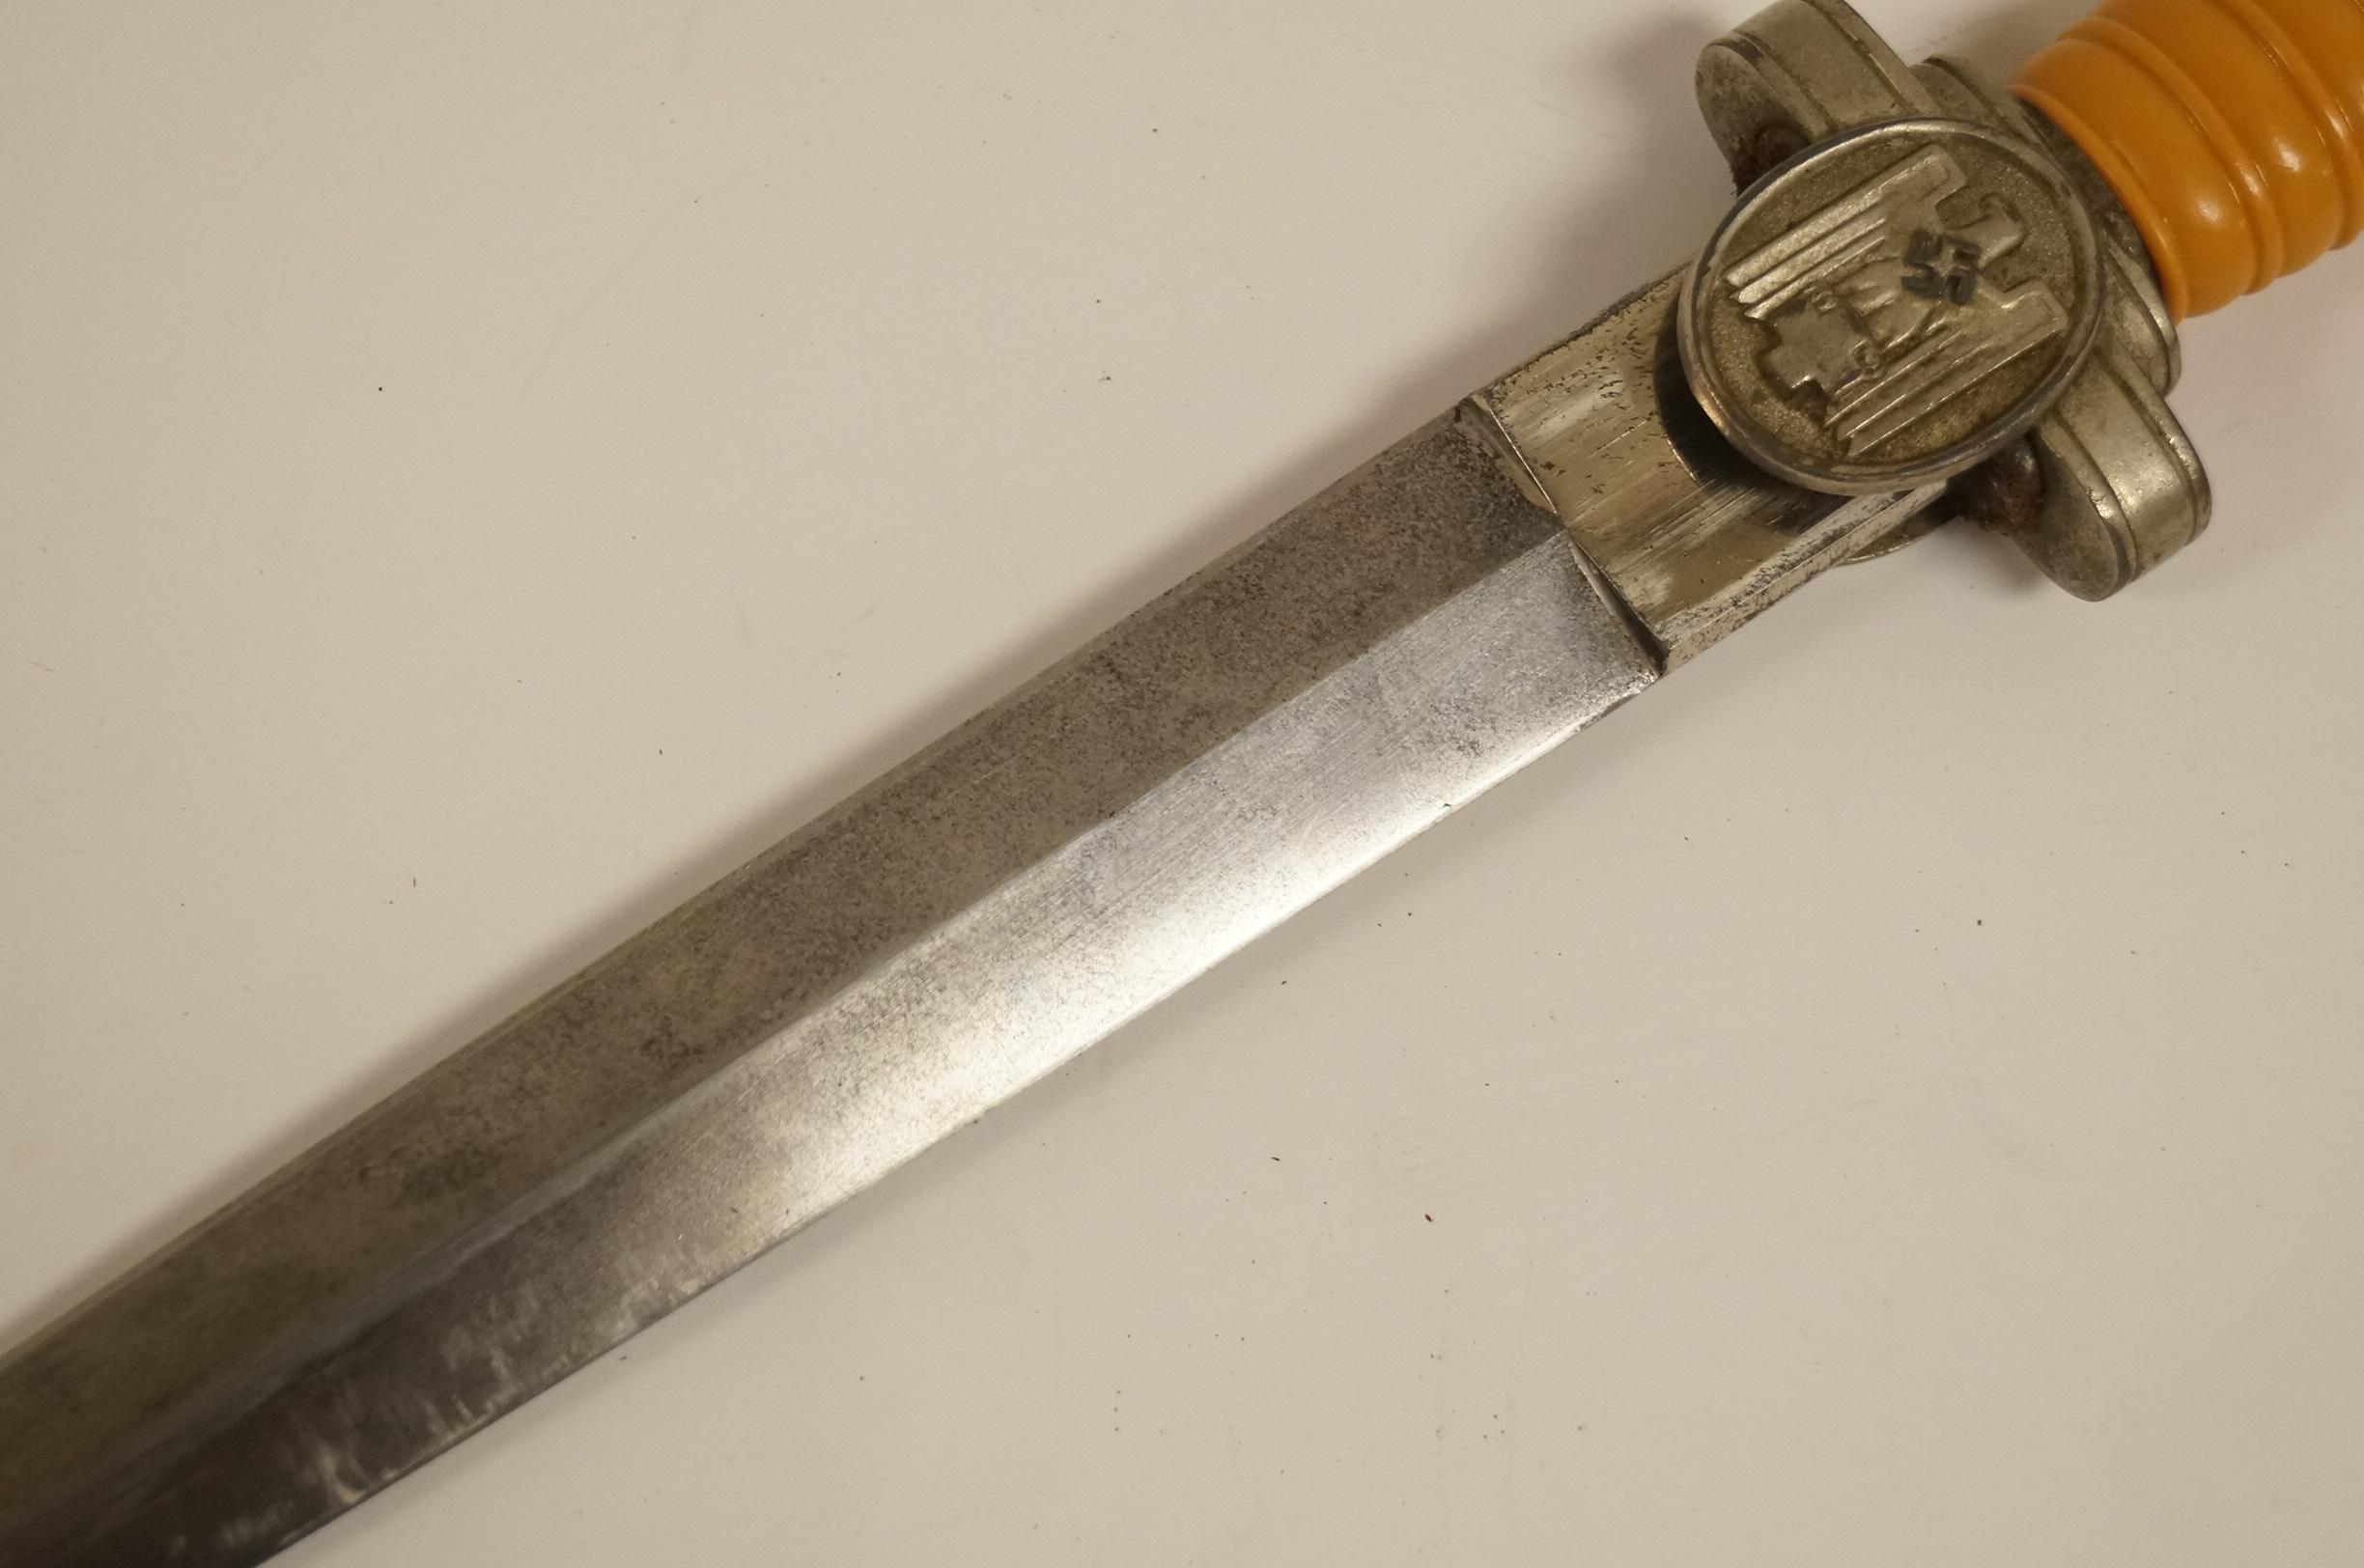 Personalized "Dr. S Mainz" German Red Cross DKR Nazi Leader's Dagger w/ Scabbard